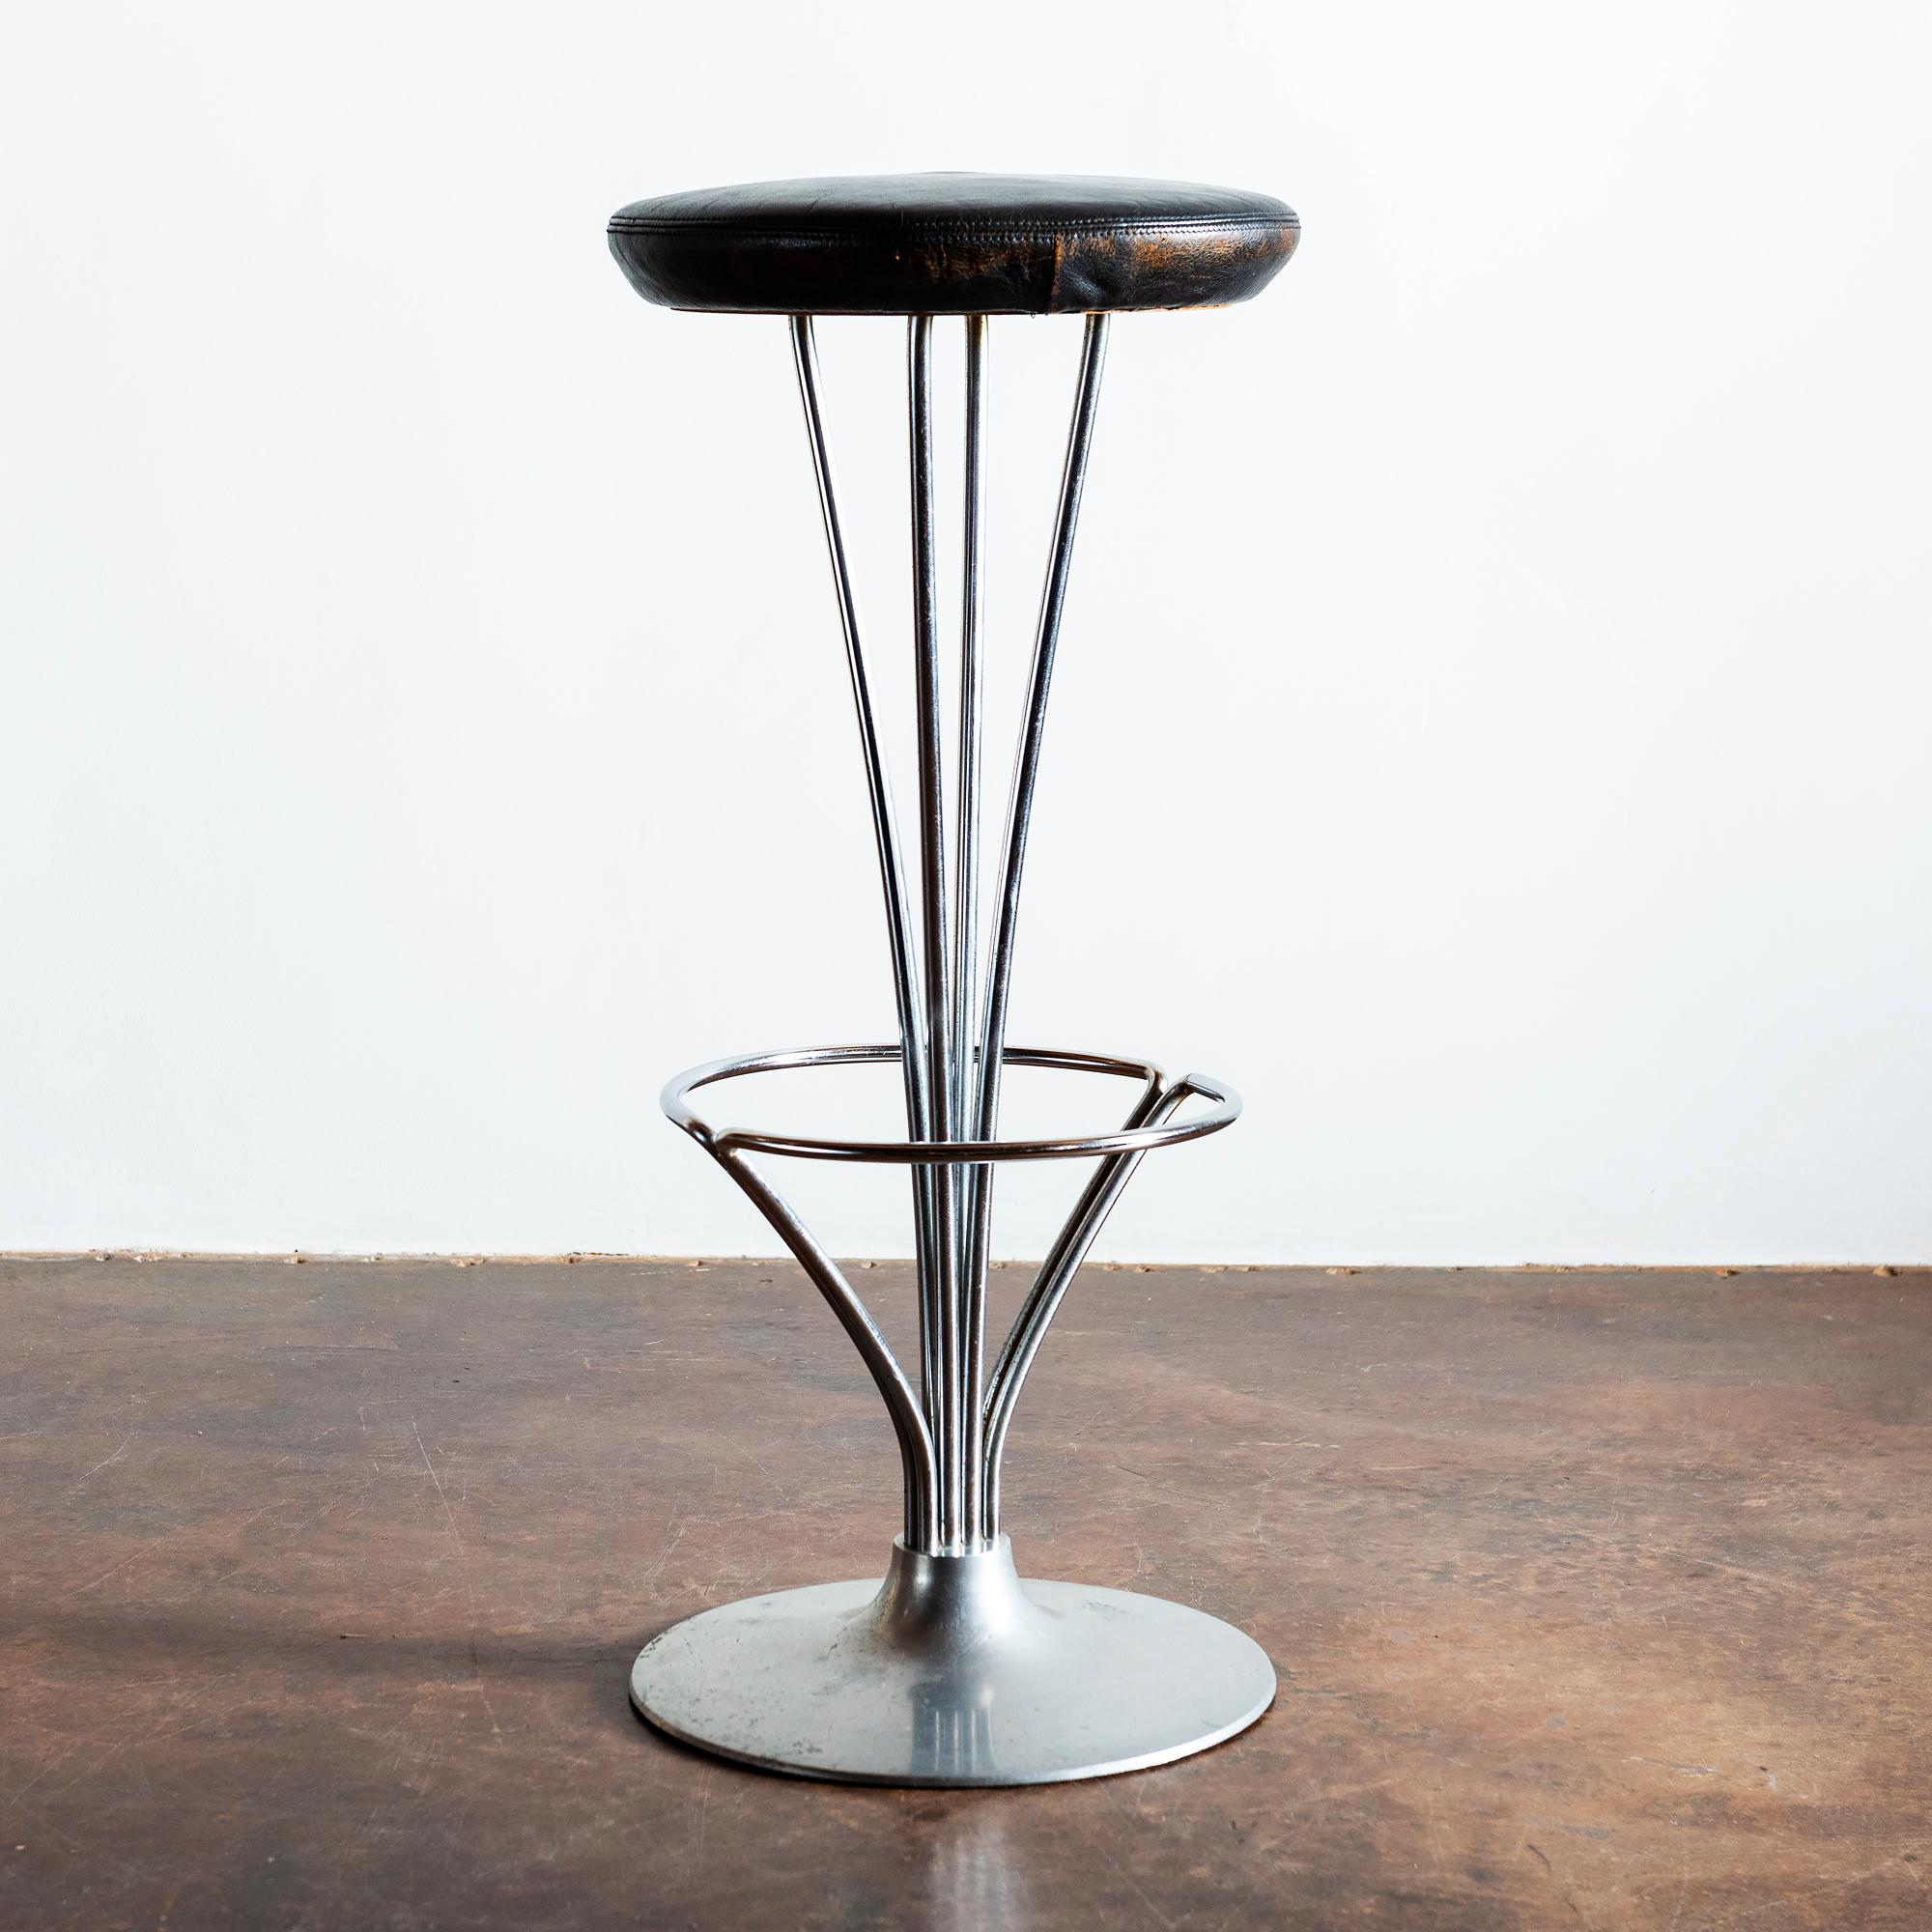 Four Piet Hein bar stools with chromed steel frames and aluminum bases, seats in black leather. Manufactured by Fritz Hansen, 1960s, Denmark.